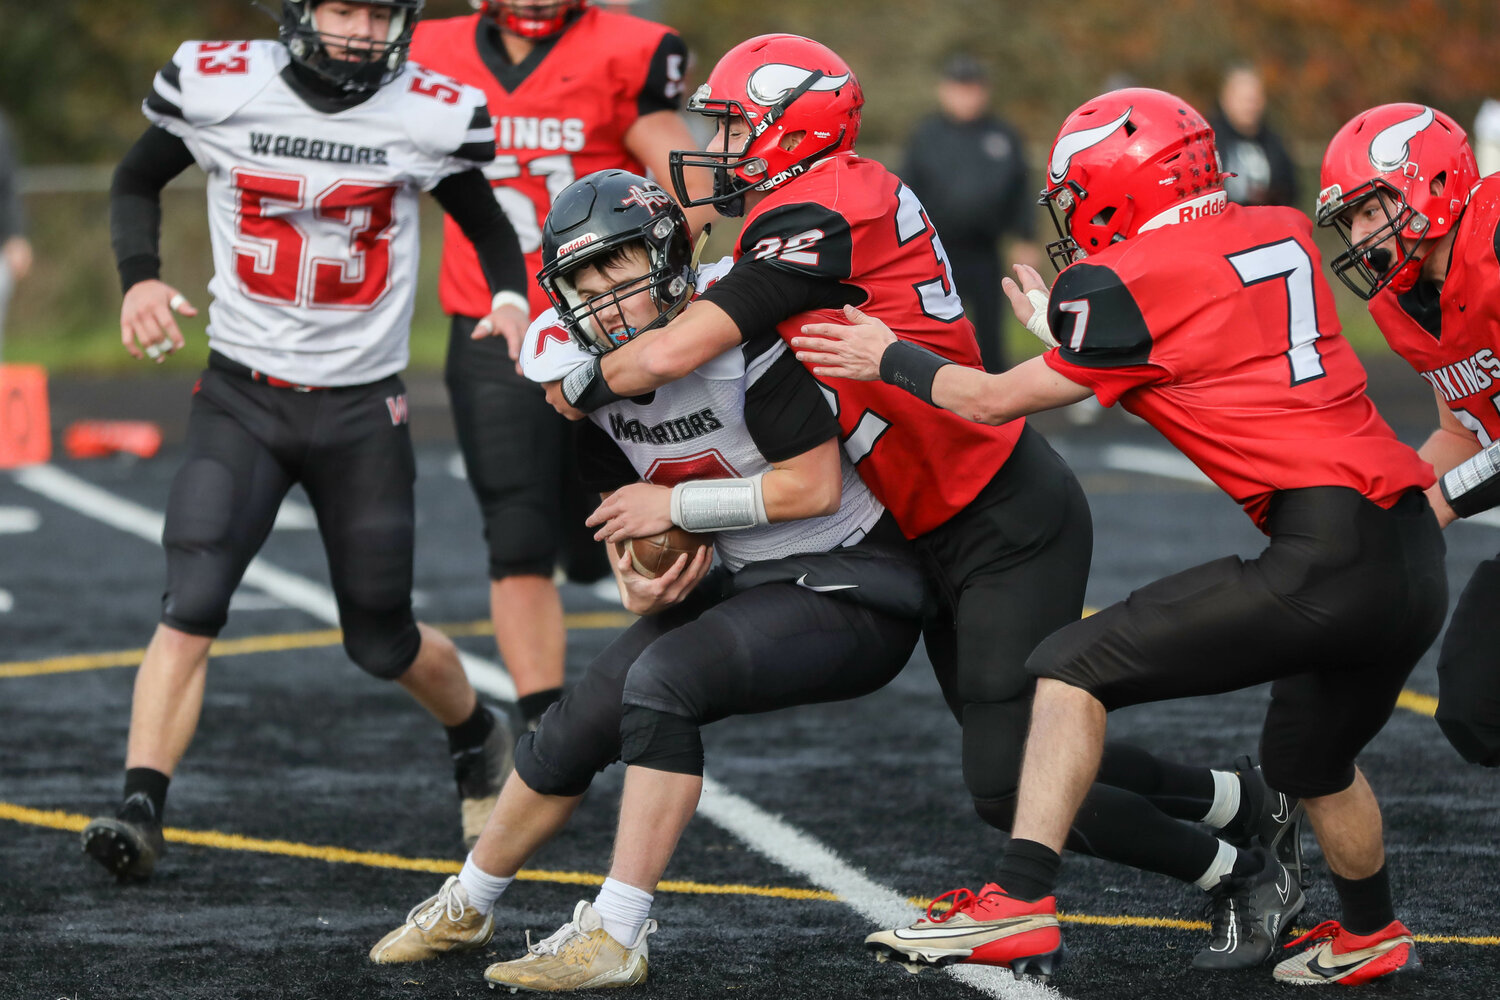 Hunter Isom stands up ACH quarterback Caden Correia during the first half of Mossyrock's 46-30 win over Almira-Coulee-Hartline in the 1B state quarterfinals, Nov. 18 in Tenino.